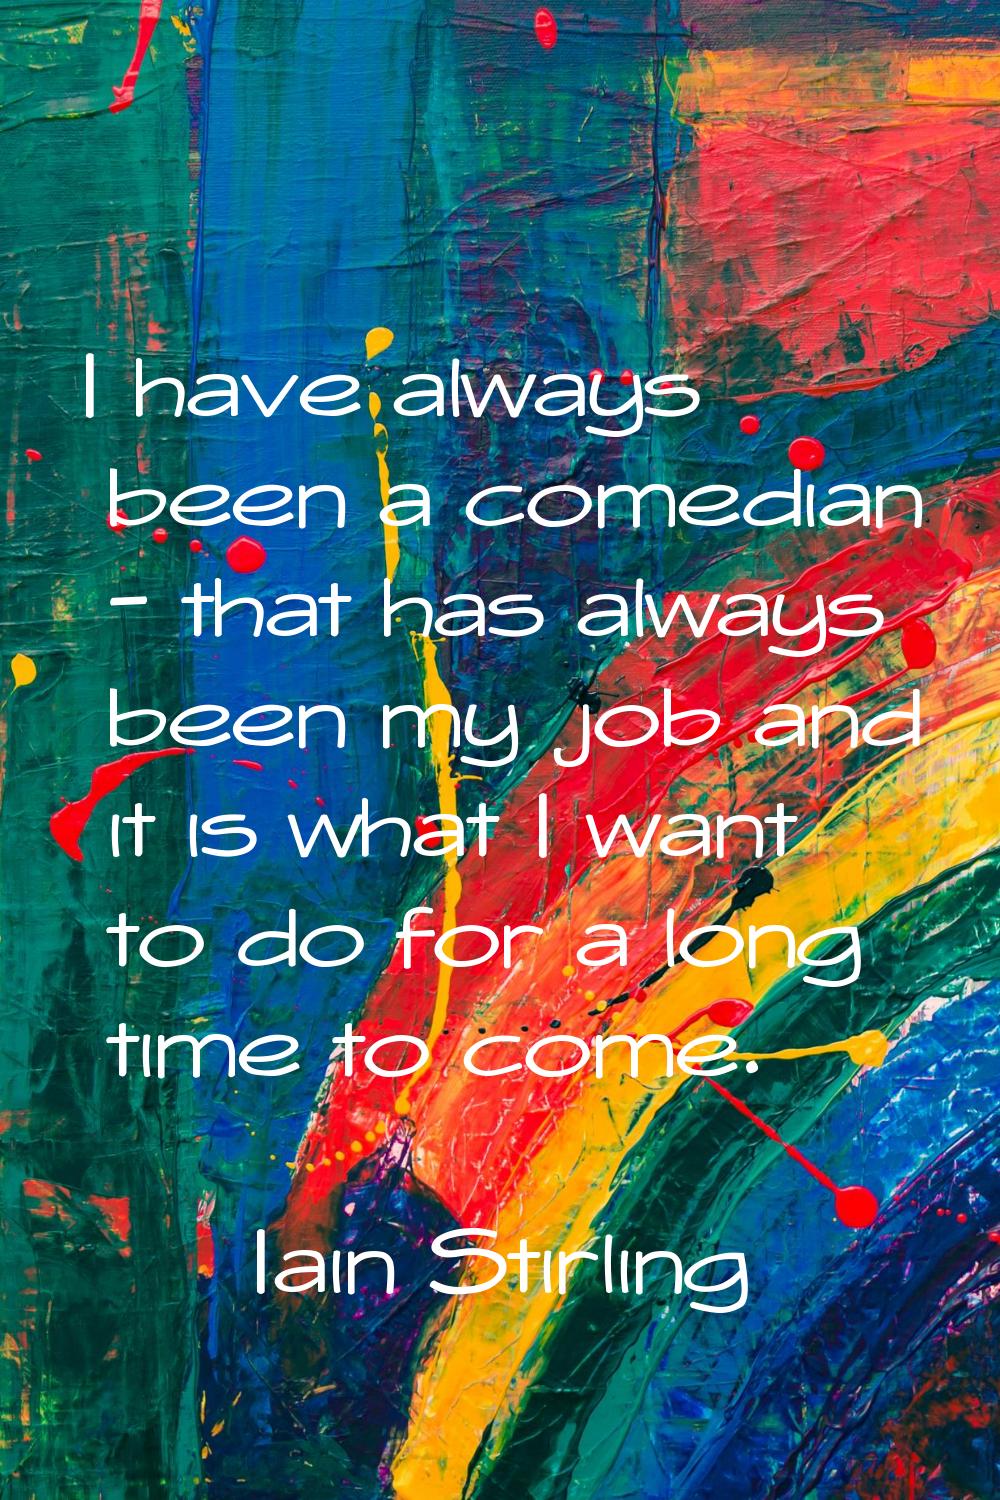 I have always been a comedian - that has always been my job and it is what I want to do for a long 